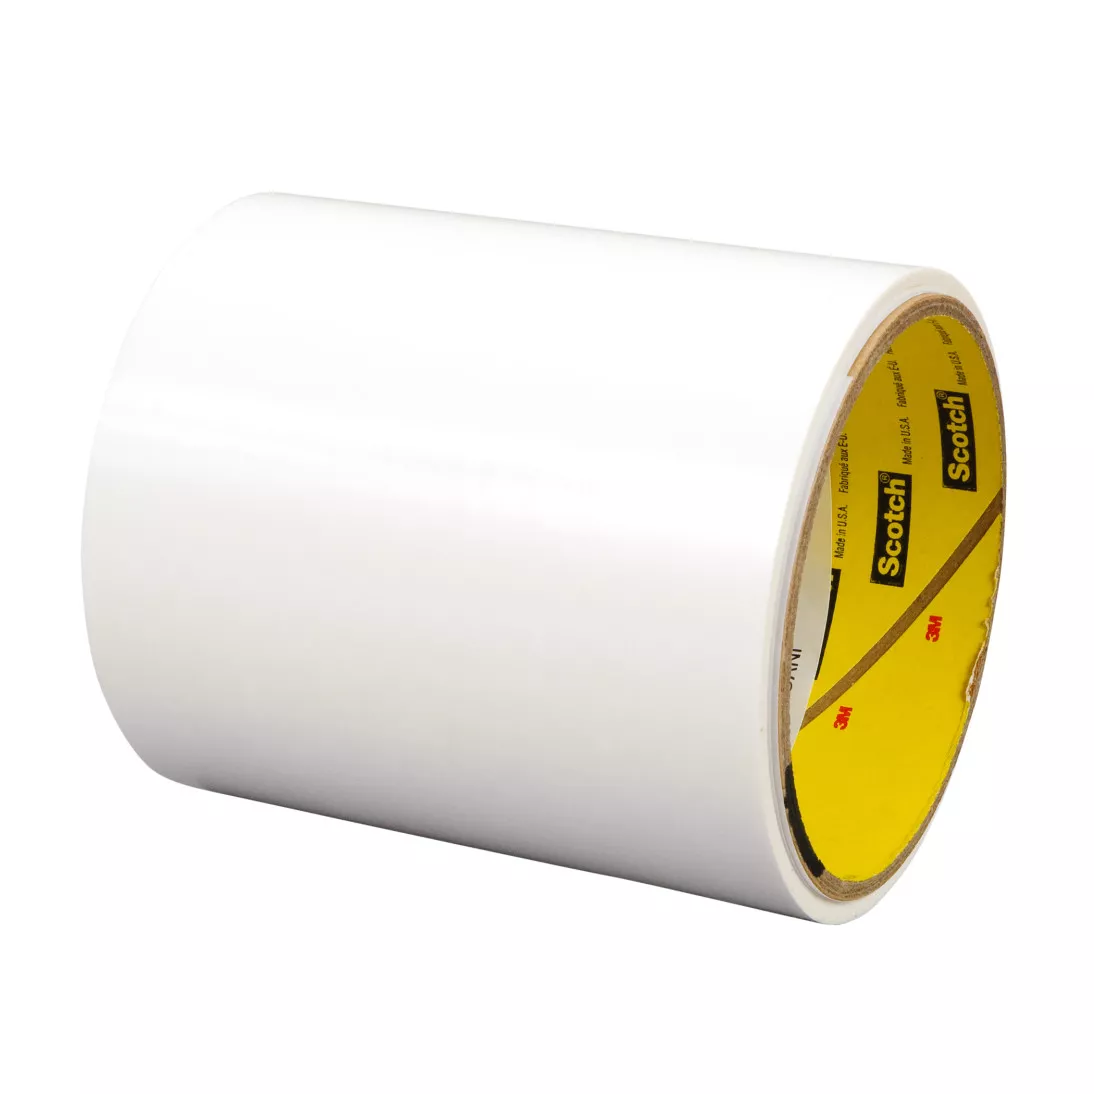 3M™ Adhesive Transfer Tape 9457, Clear, 3 in x 60 yd, 1 mil, 4 rolls per
case